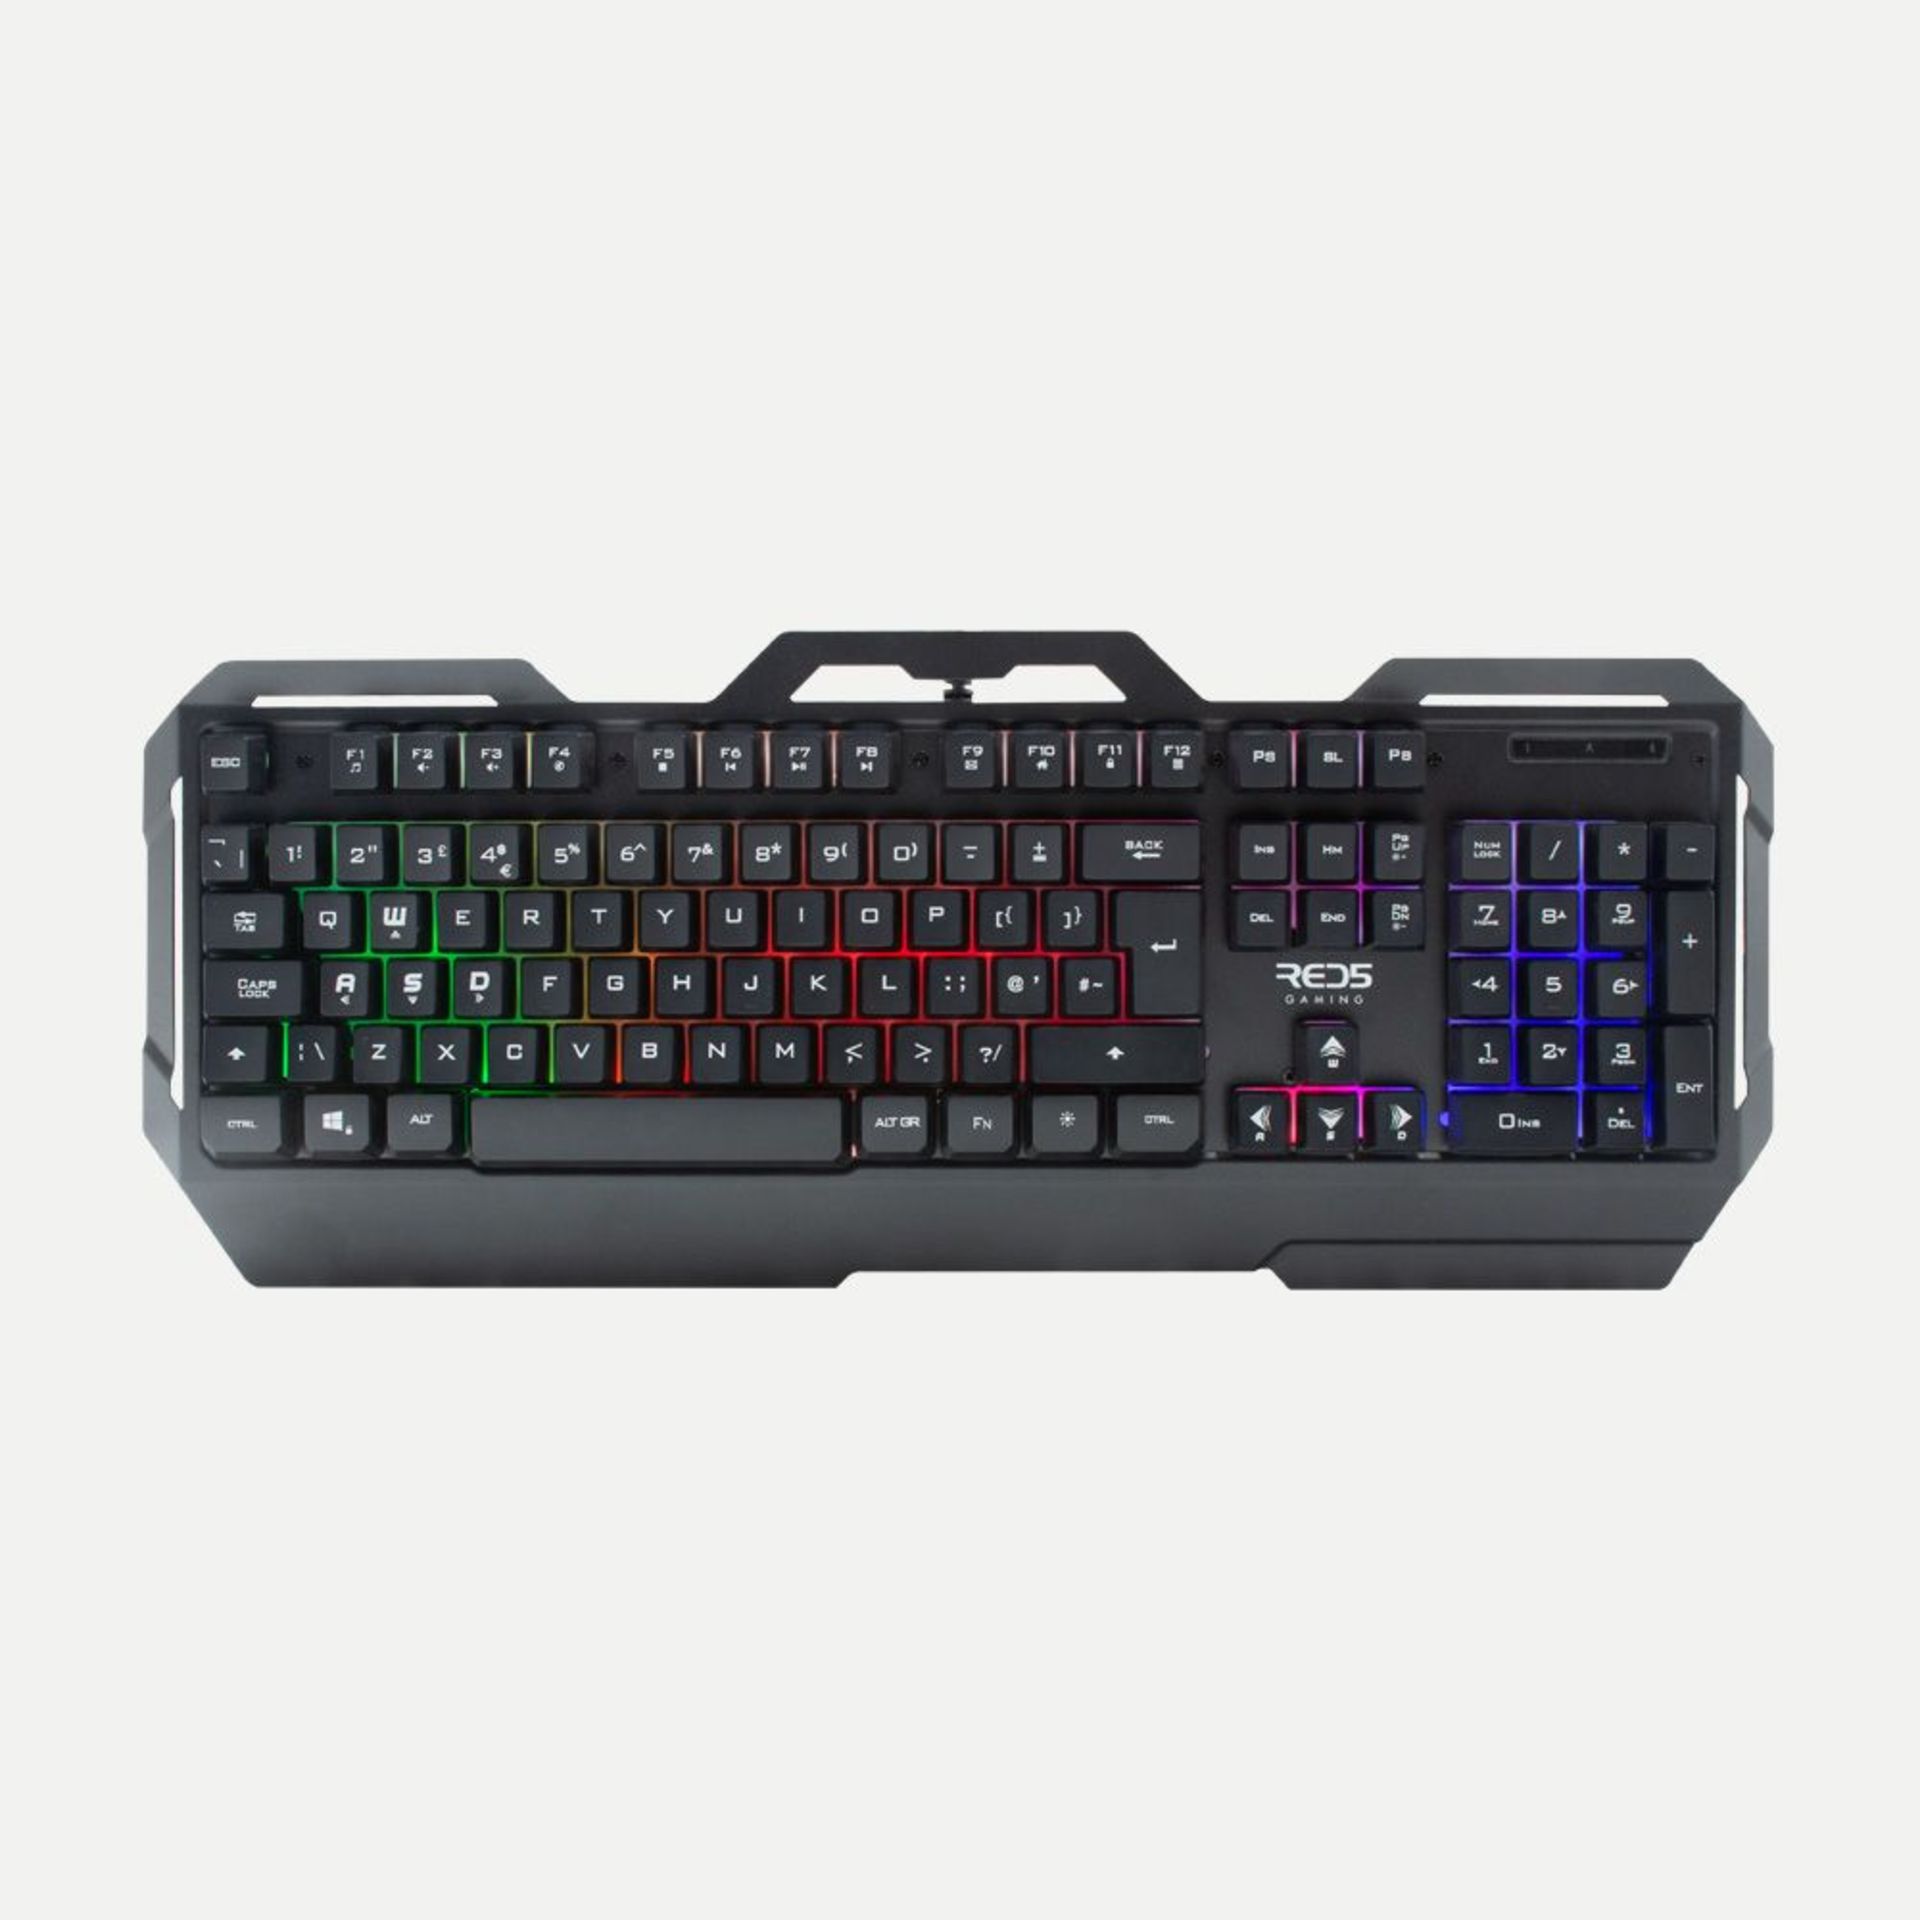 (6D) 8x Items. 6x Red5 Light Up Gaming Keyboard. 1x Red5 Orbit Light Up Gaming Keyboard. 1x Trust... - Image 3 of 12